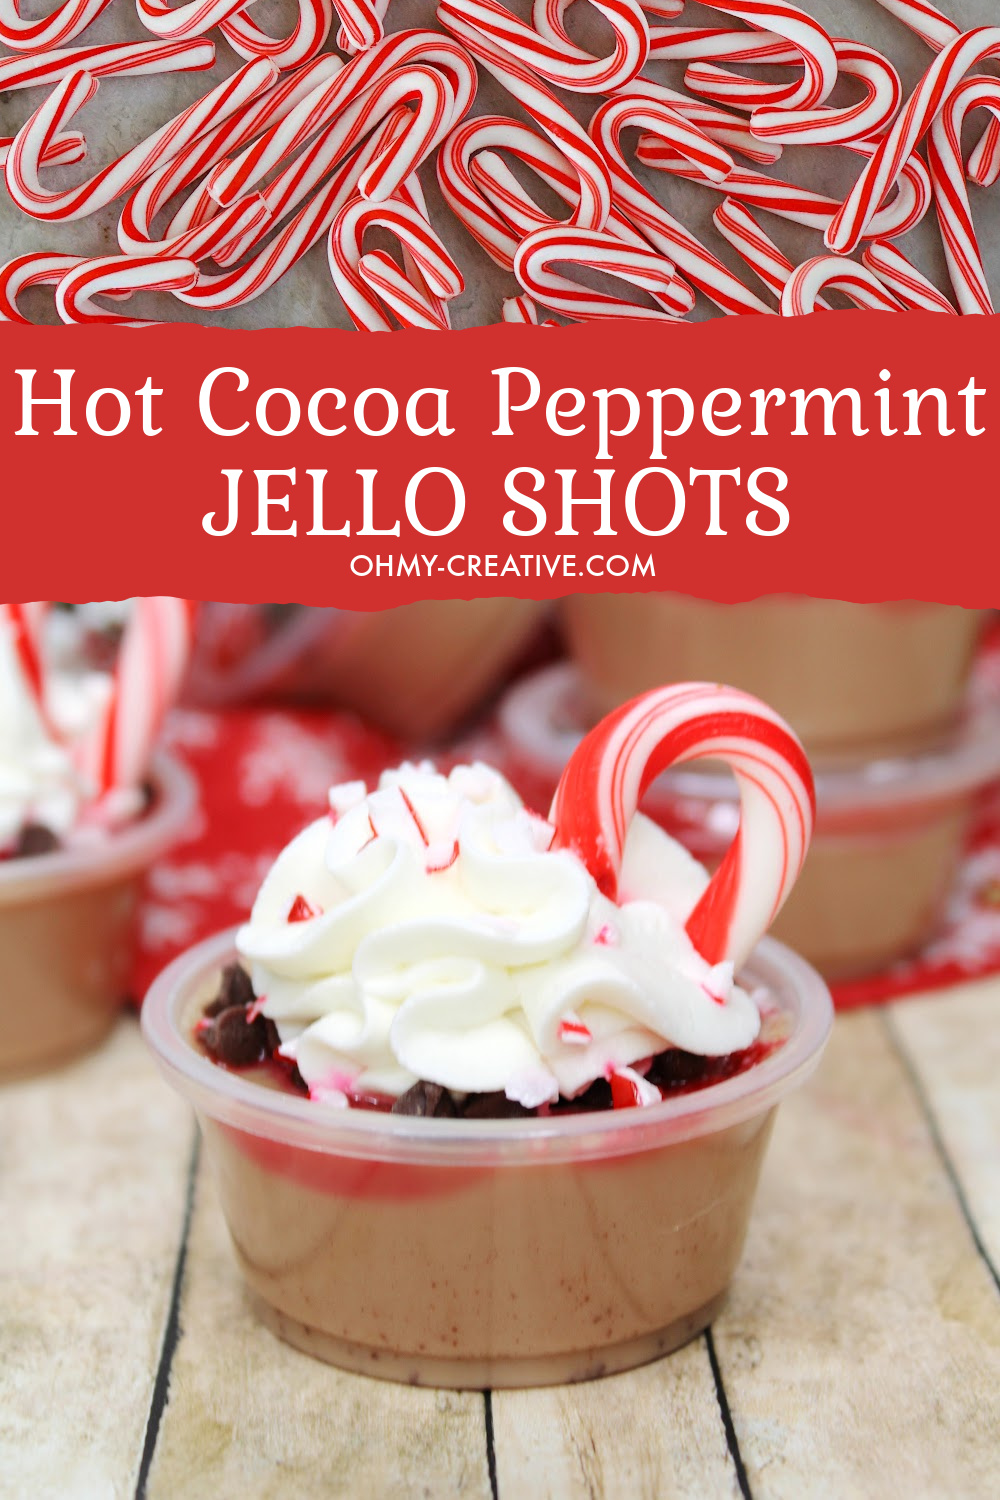 Flavors of hot chocolate and peppermint garnished with a mini candy cane are the perfect Christmas jello shot! The top photo is a background of mini candy canes. 